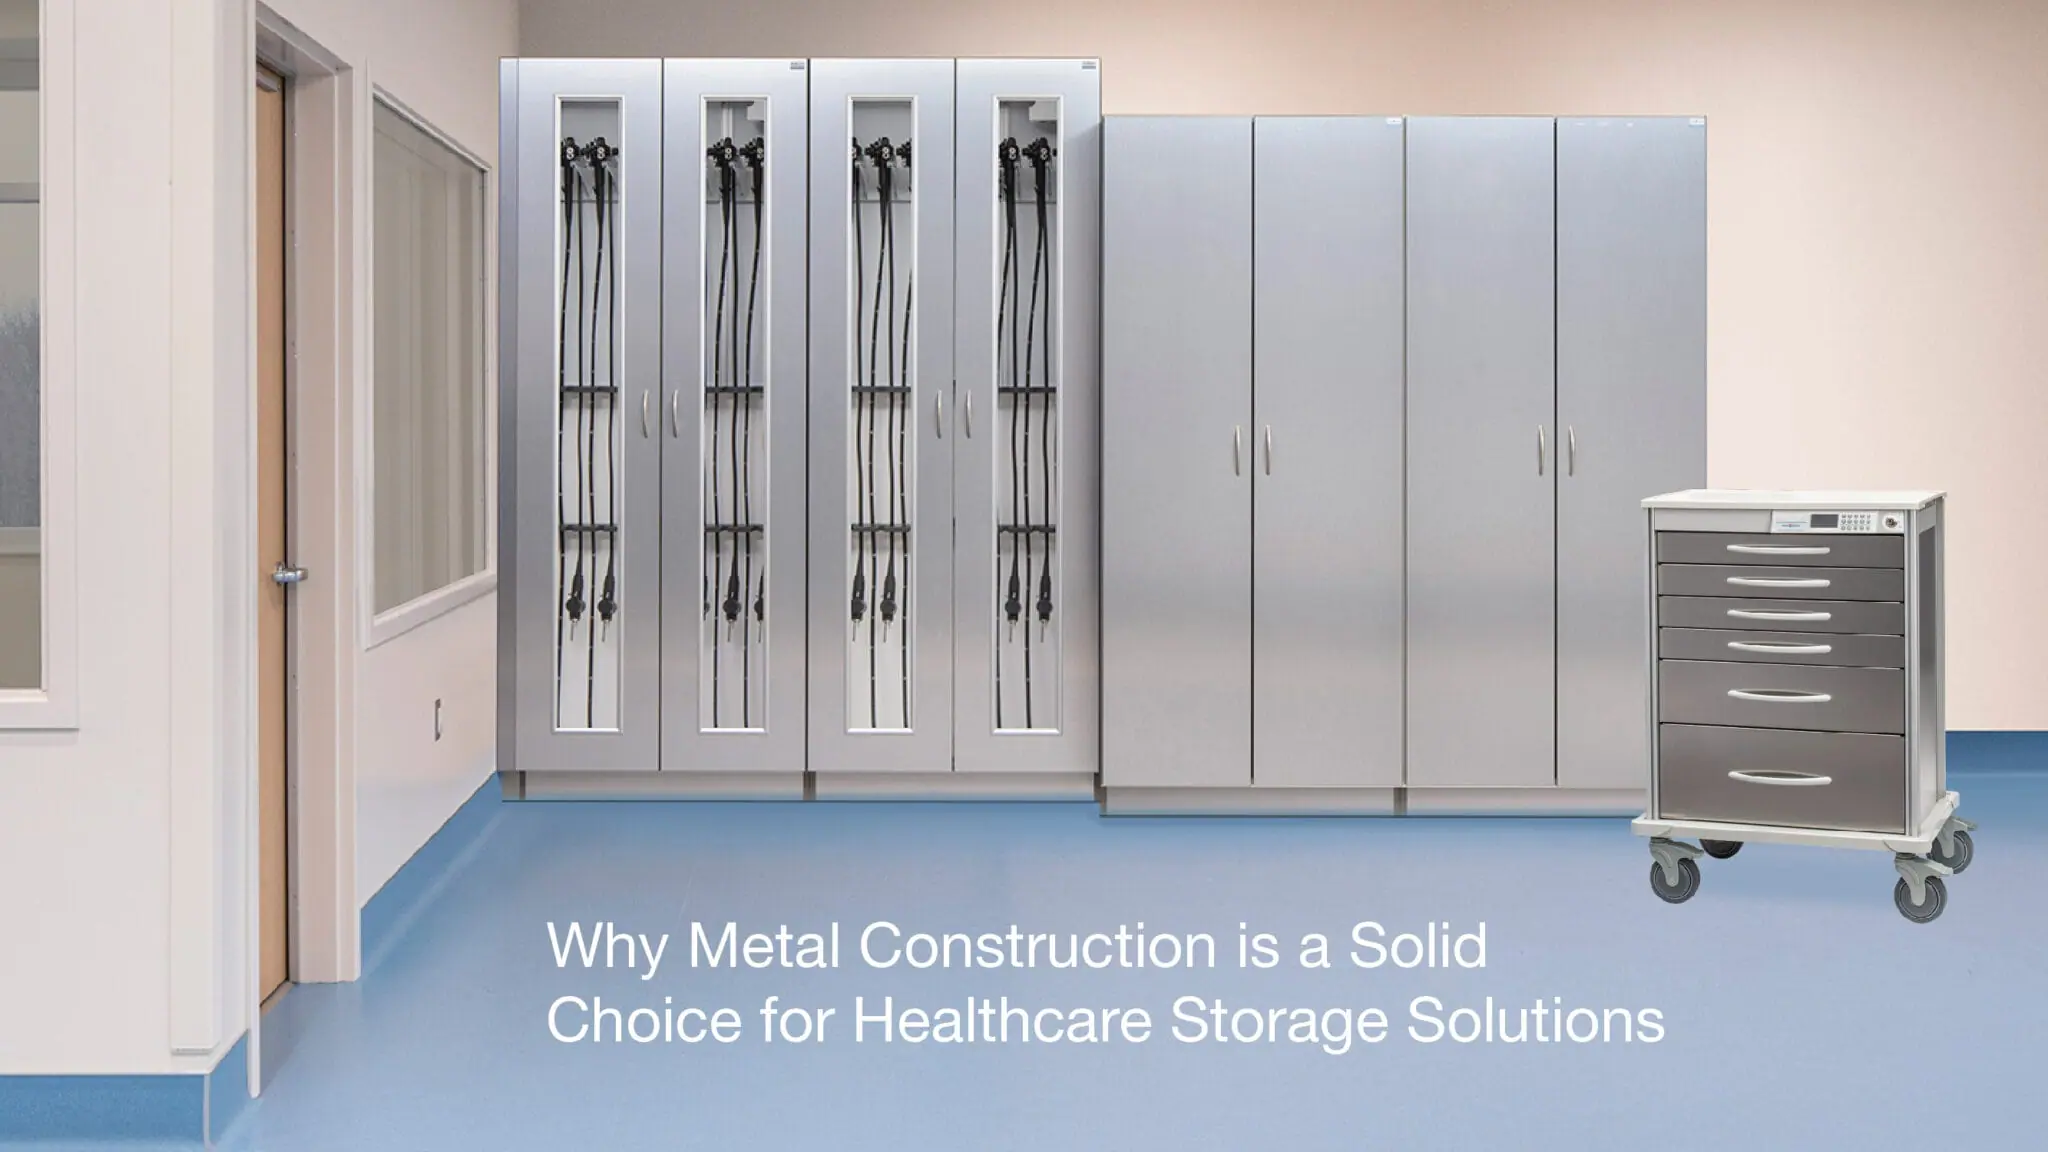 Metal Hospital Cabinets and Stainless Steel Medical Cart with text reading Why Metal Construction is a Solid Choice for Healthcare Storage Solutions